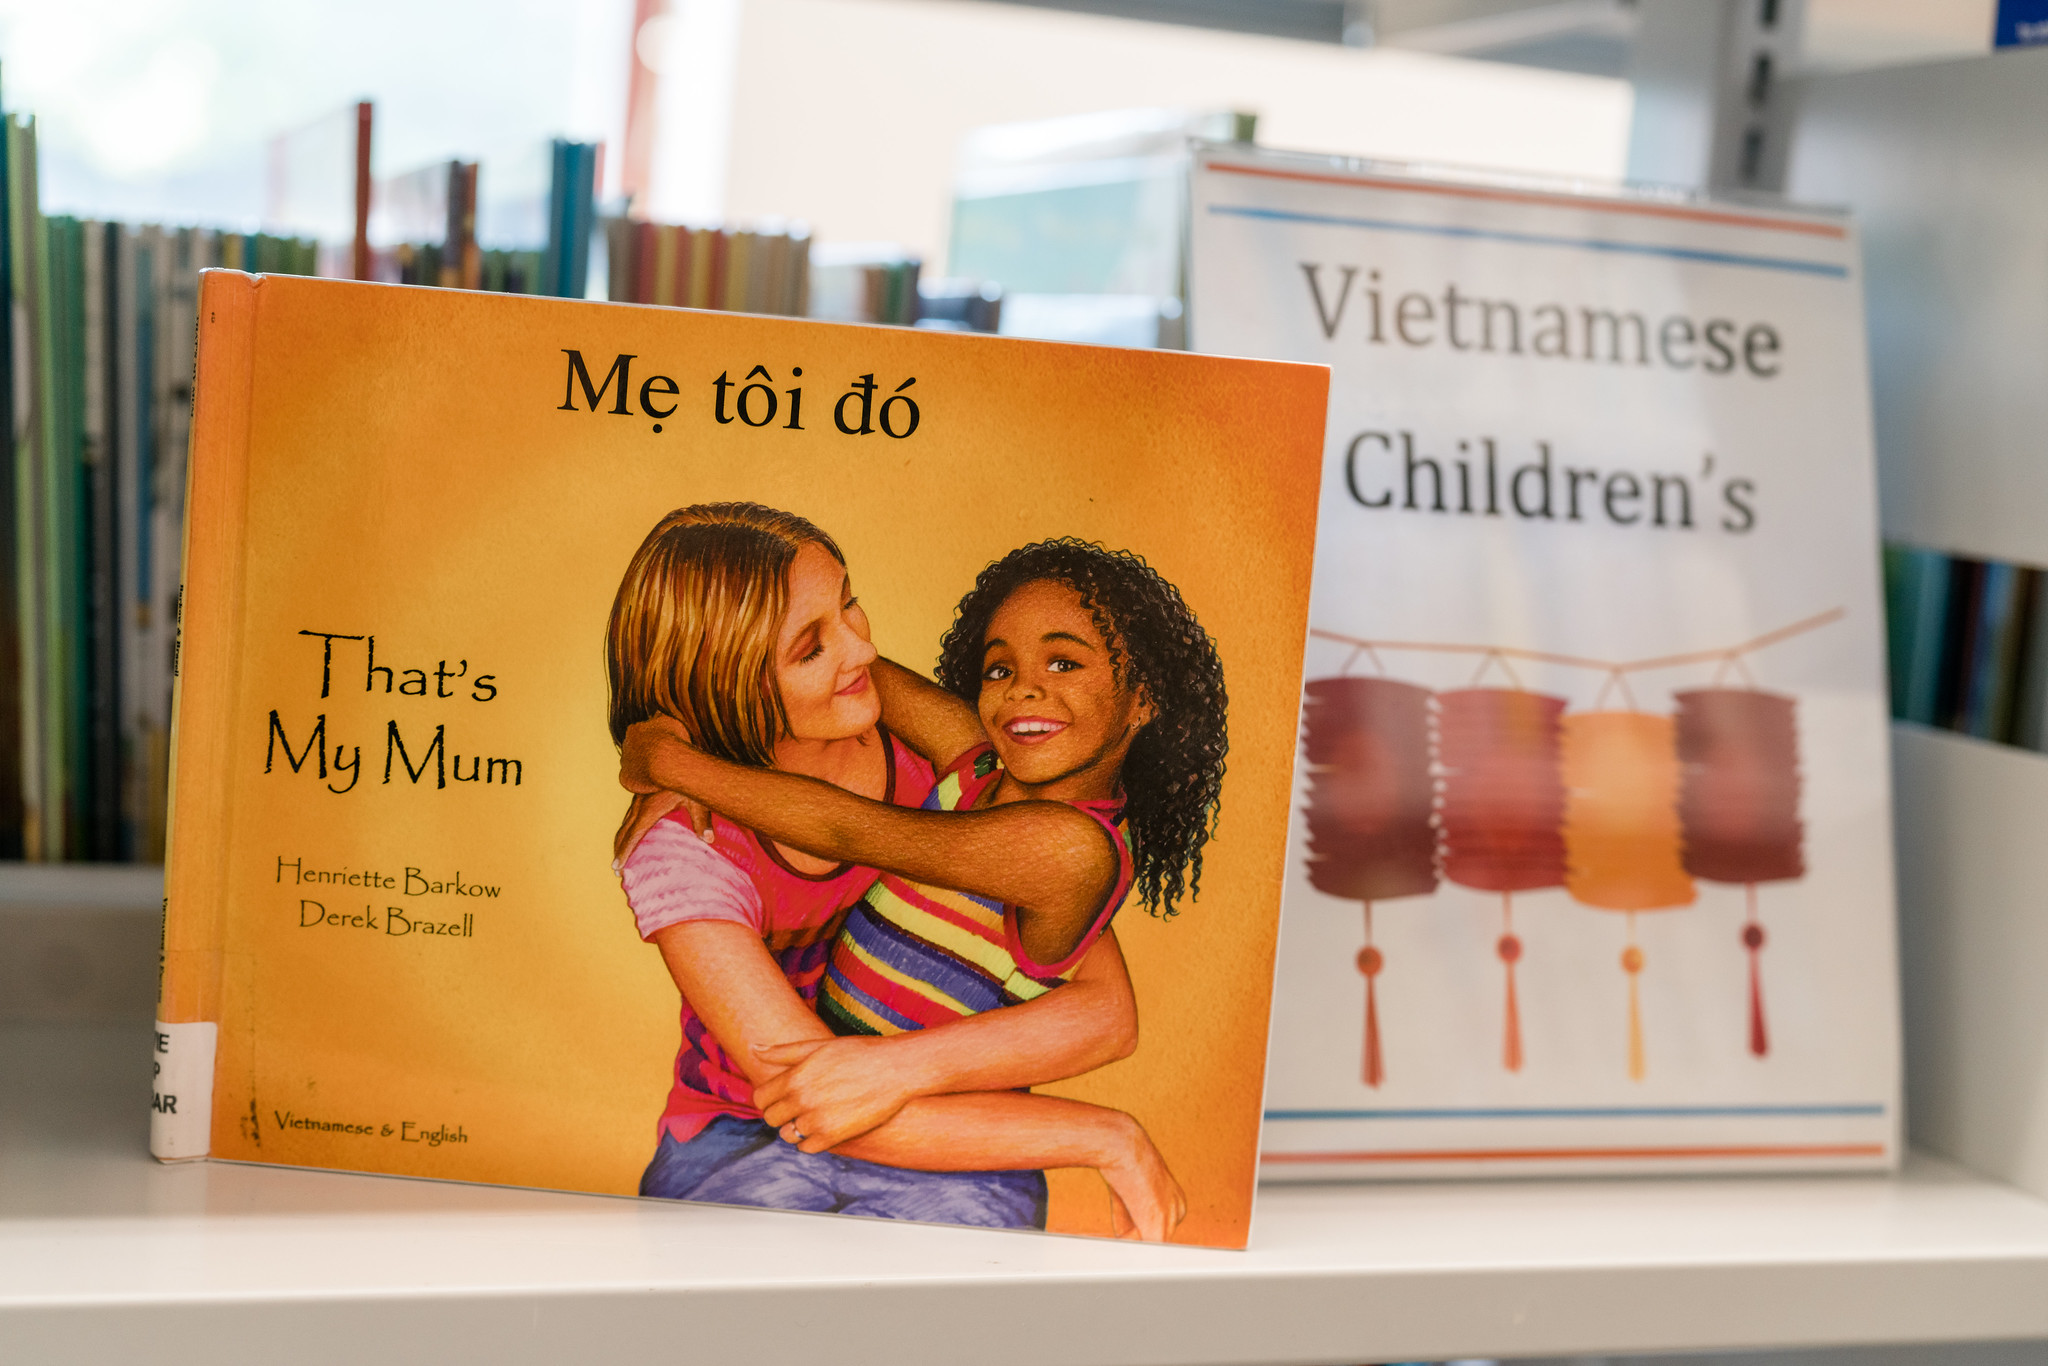 Library shelf displaying the children's picture book "That's My Mum" English and Vietnamese version next to a sign reading "Vietnamese Children's"